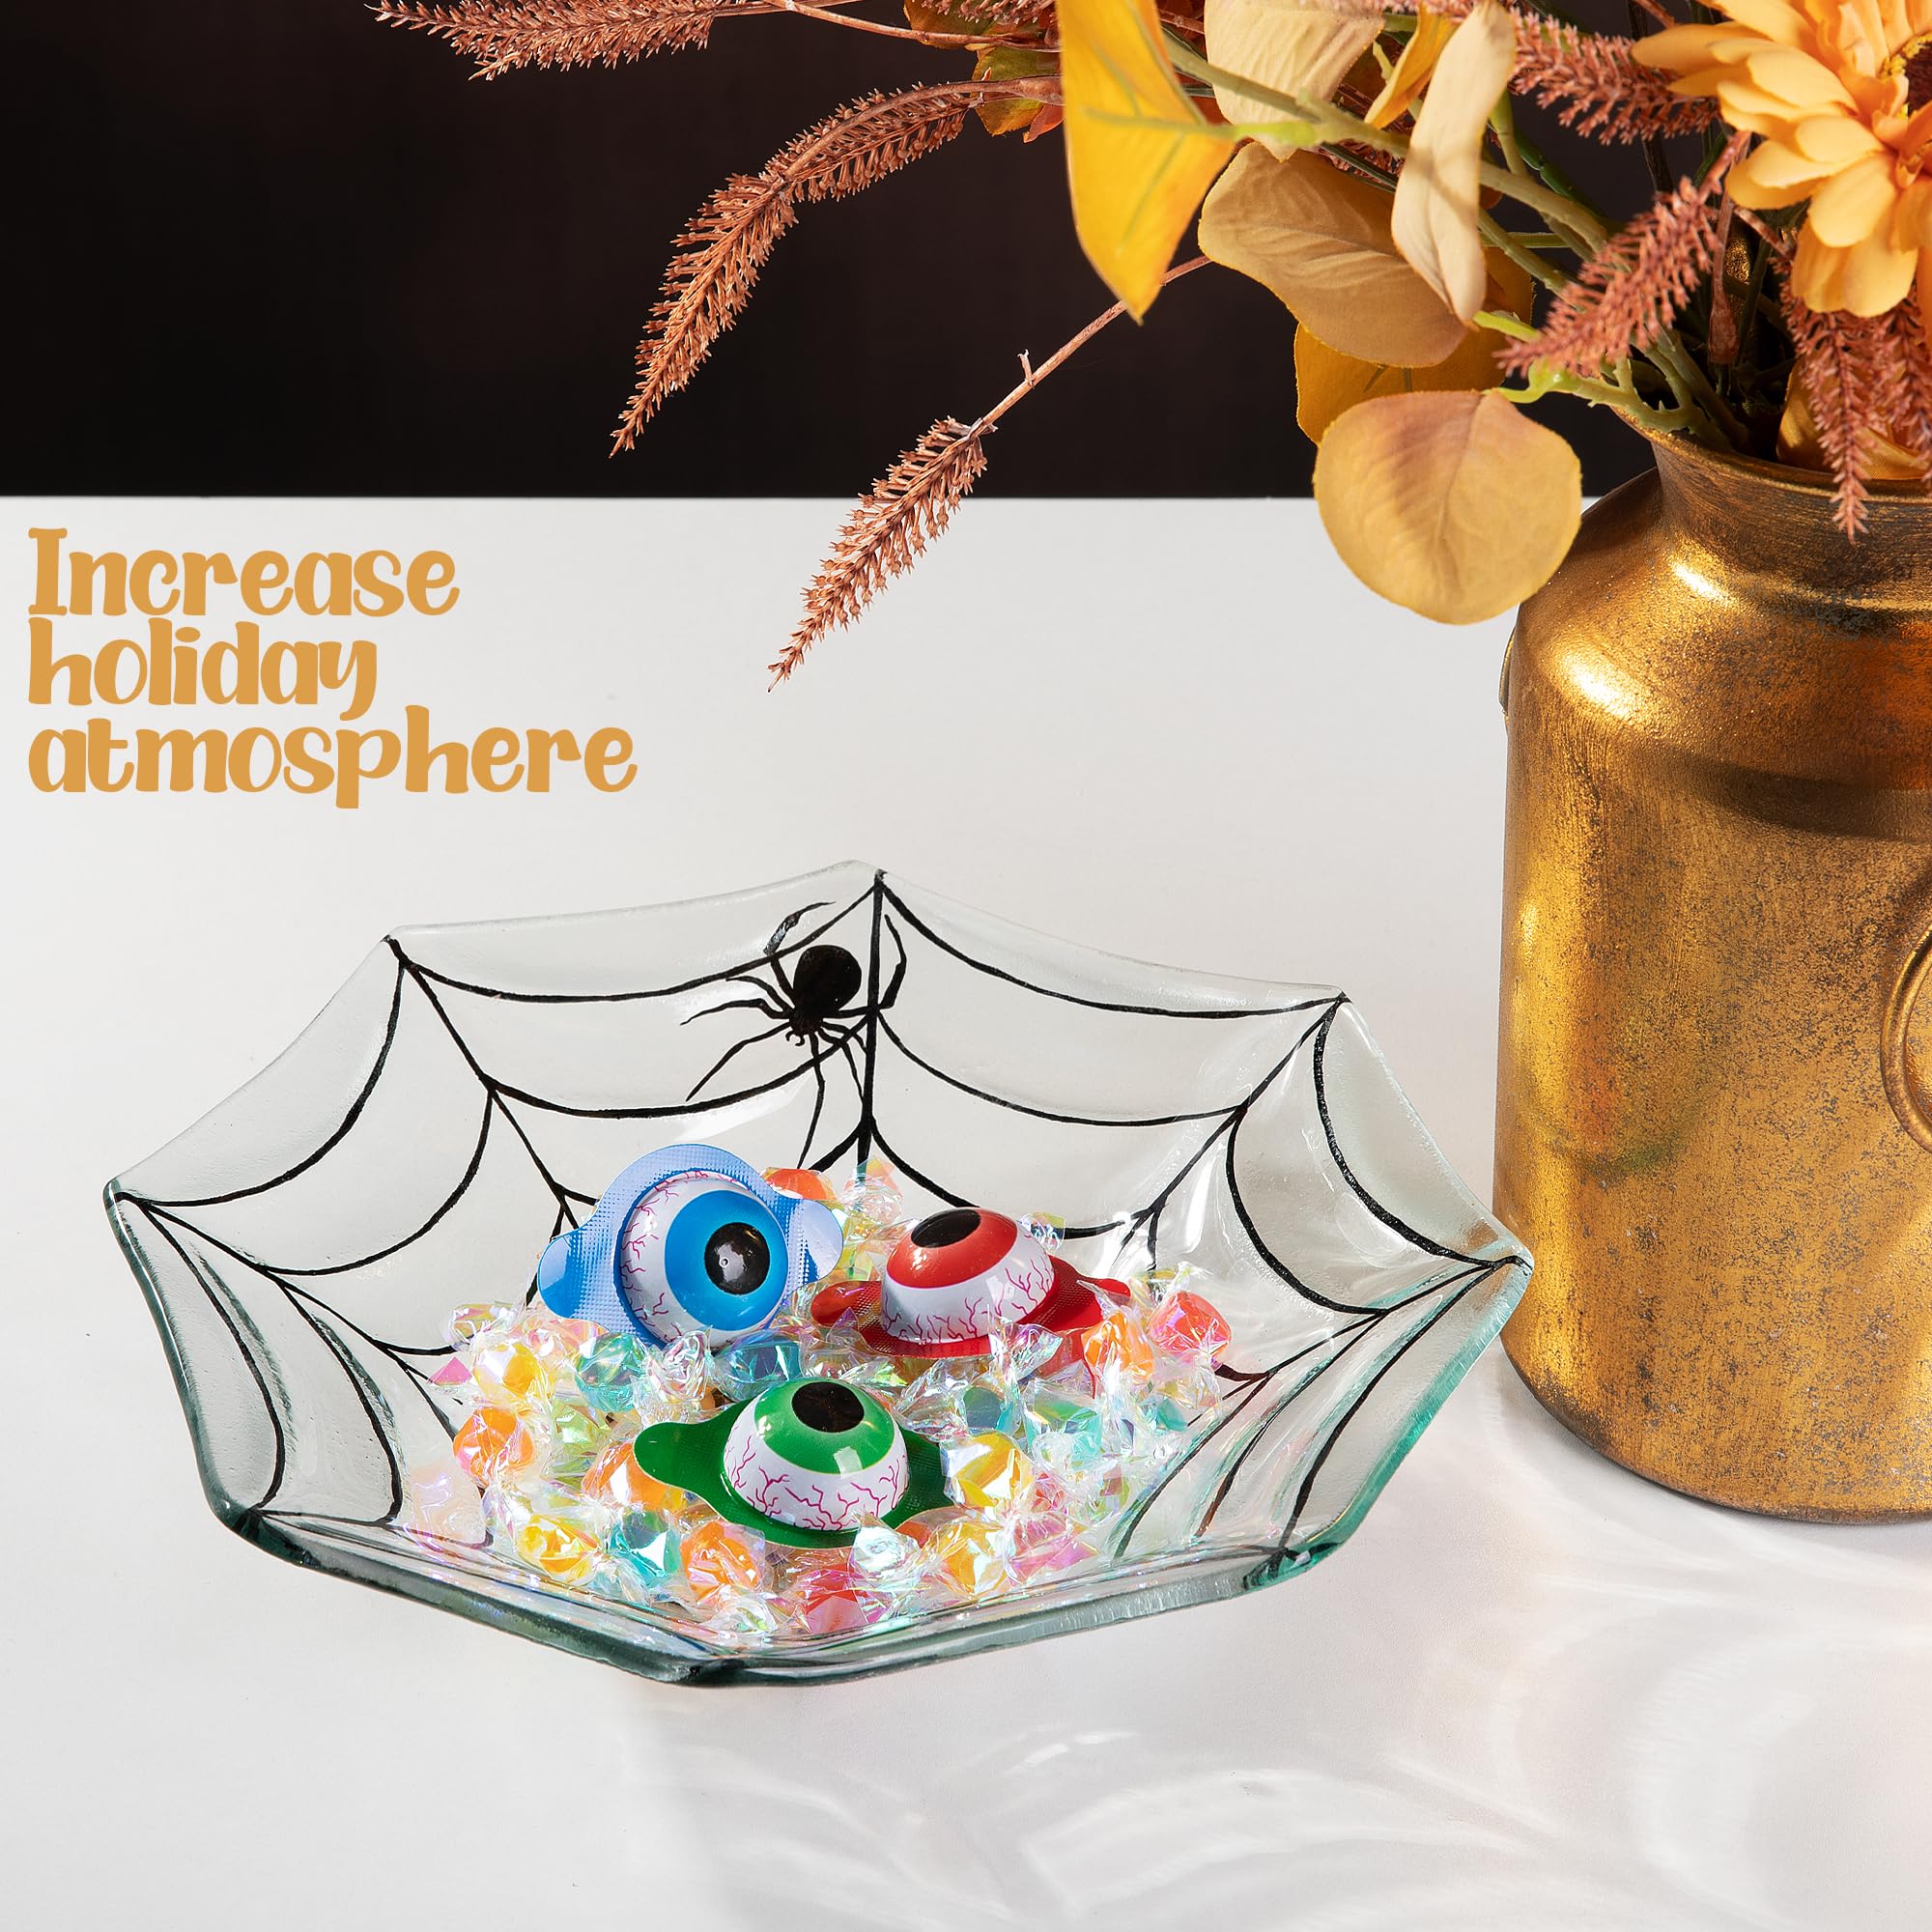 LFUTARI Glass Halloween Candy Bowl-Spider Web Candy Bowl Candy Dish -Decorative Treat Dish for Halloween Party Supplies